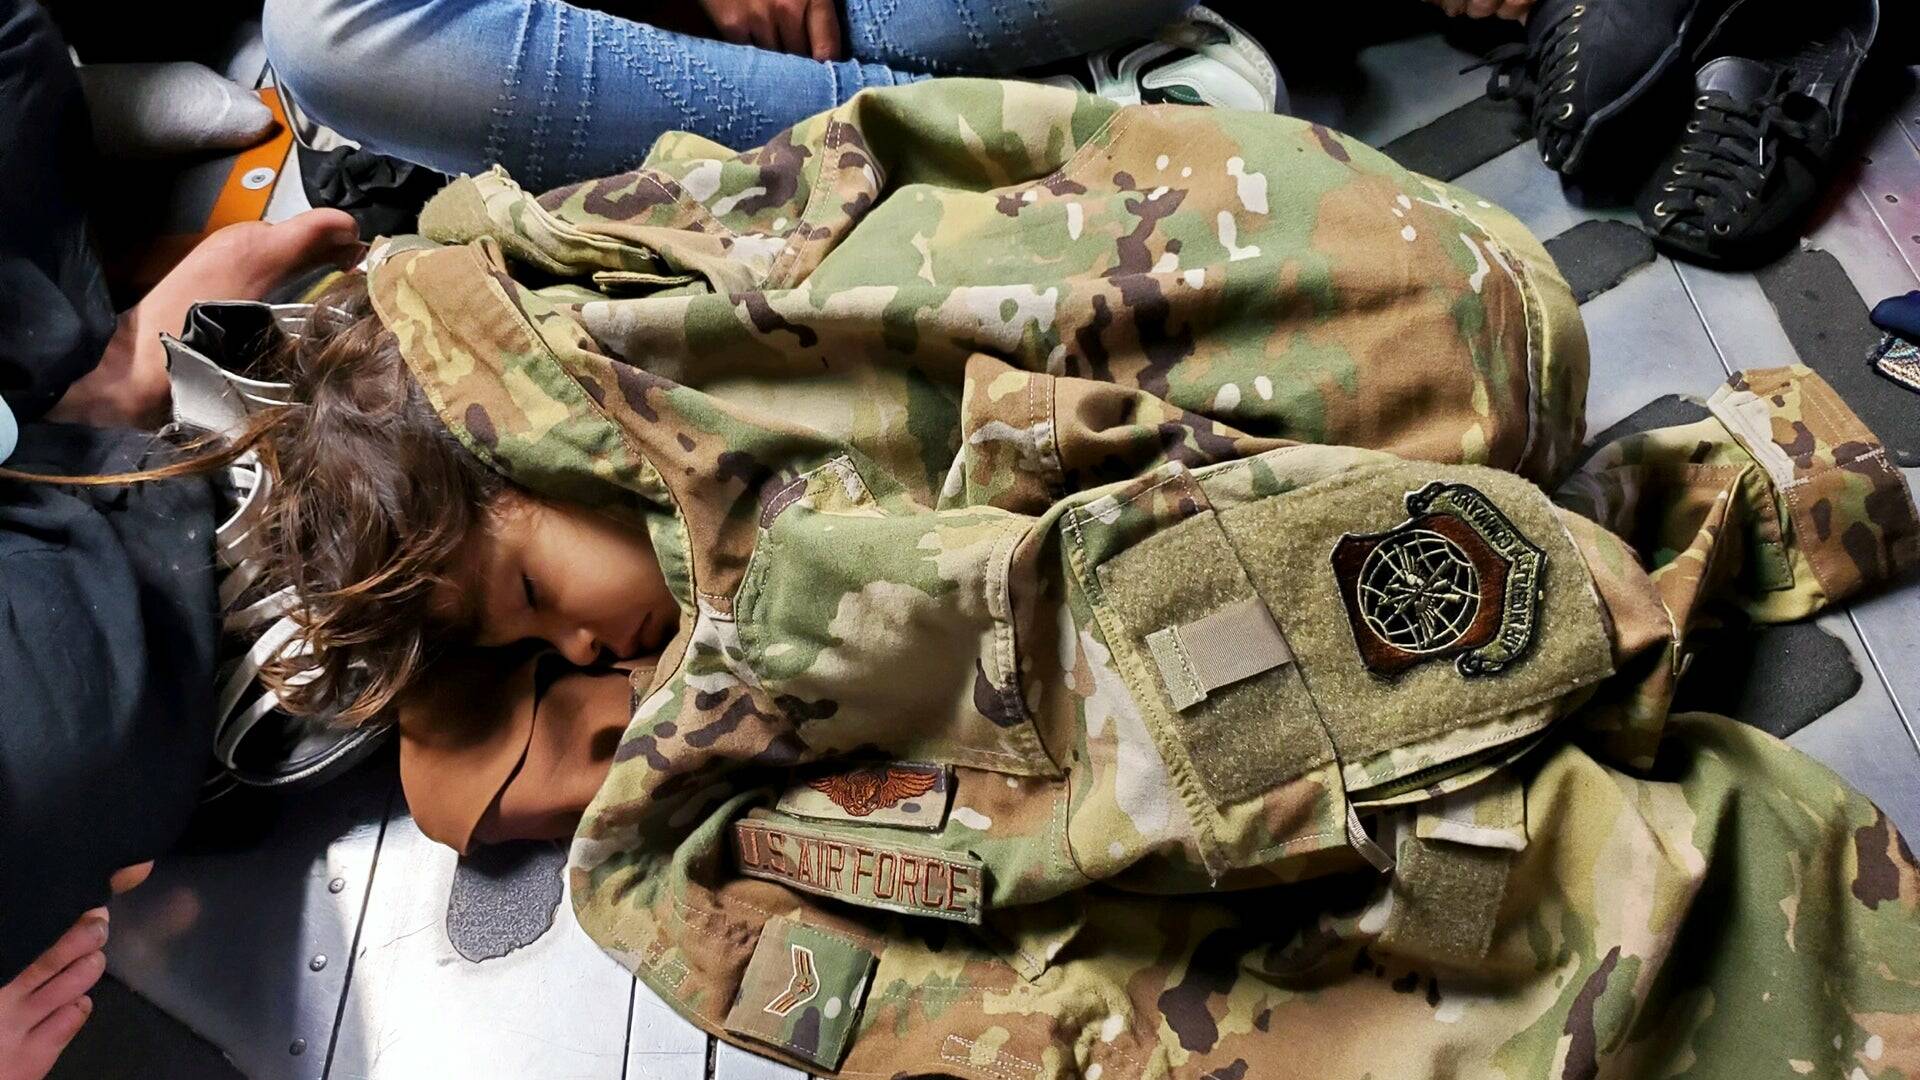 U.S. Air Force Photo
An Afghan child sleeps on the cargo floor of a U.S. Air Force C-17 Globemaster III, kept warm by the uniform of the C-17 loadmaster during an evacuation flight from Kabul, Afghanistan, Aug. 15, 2021.